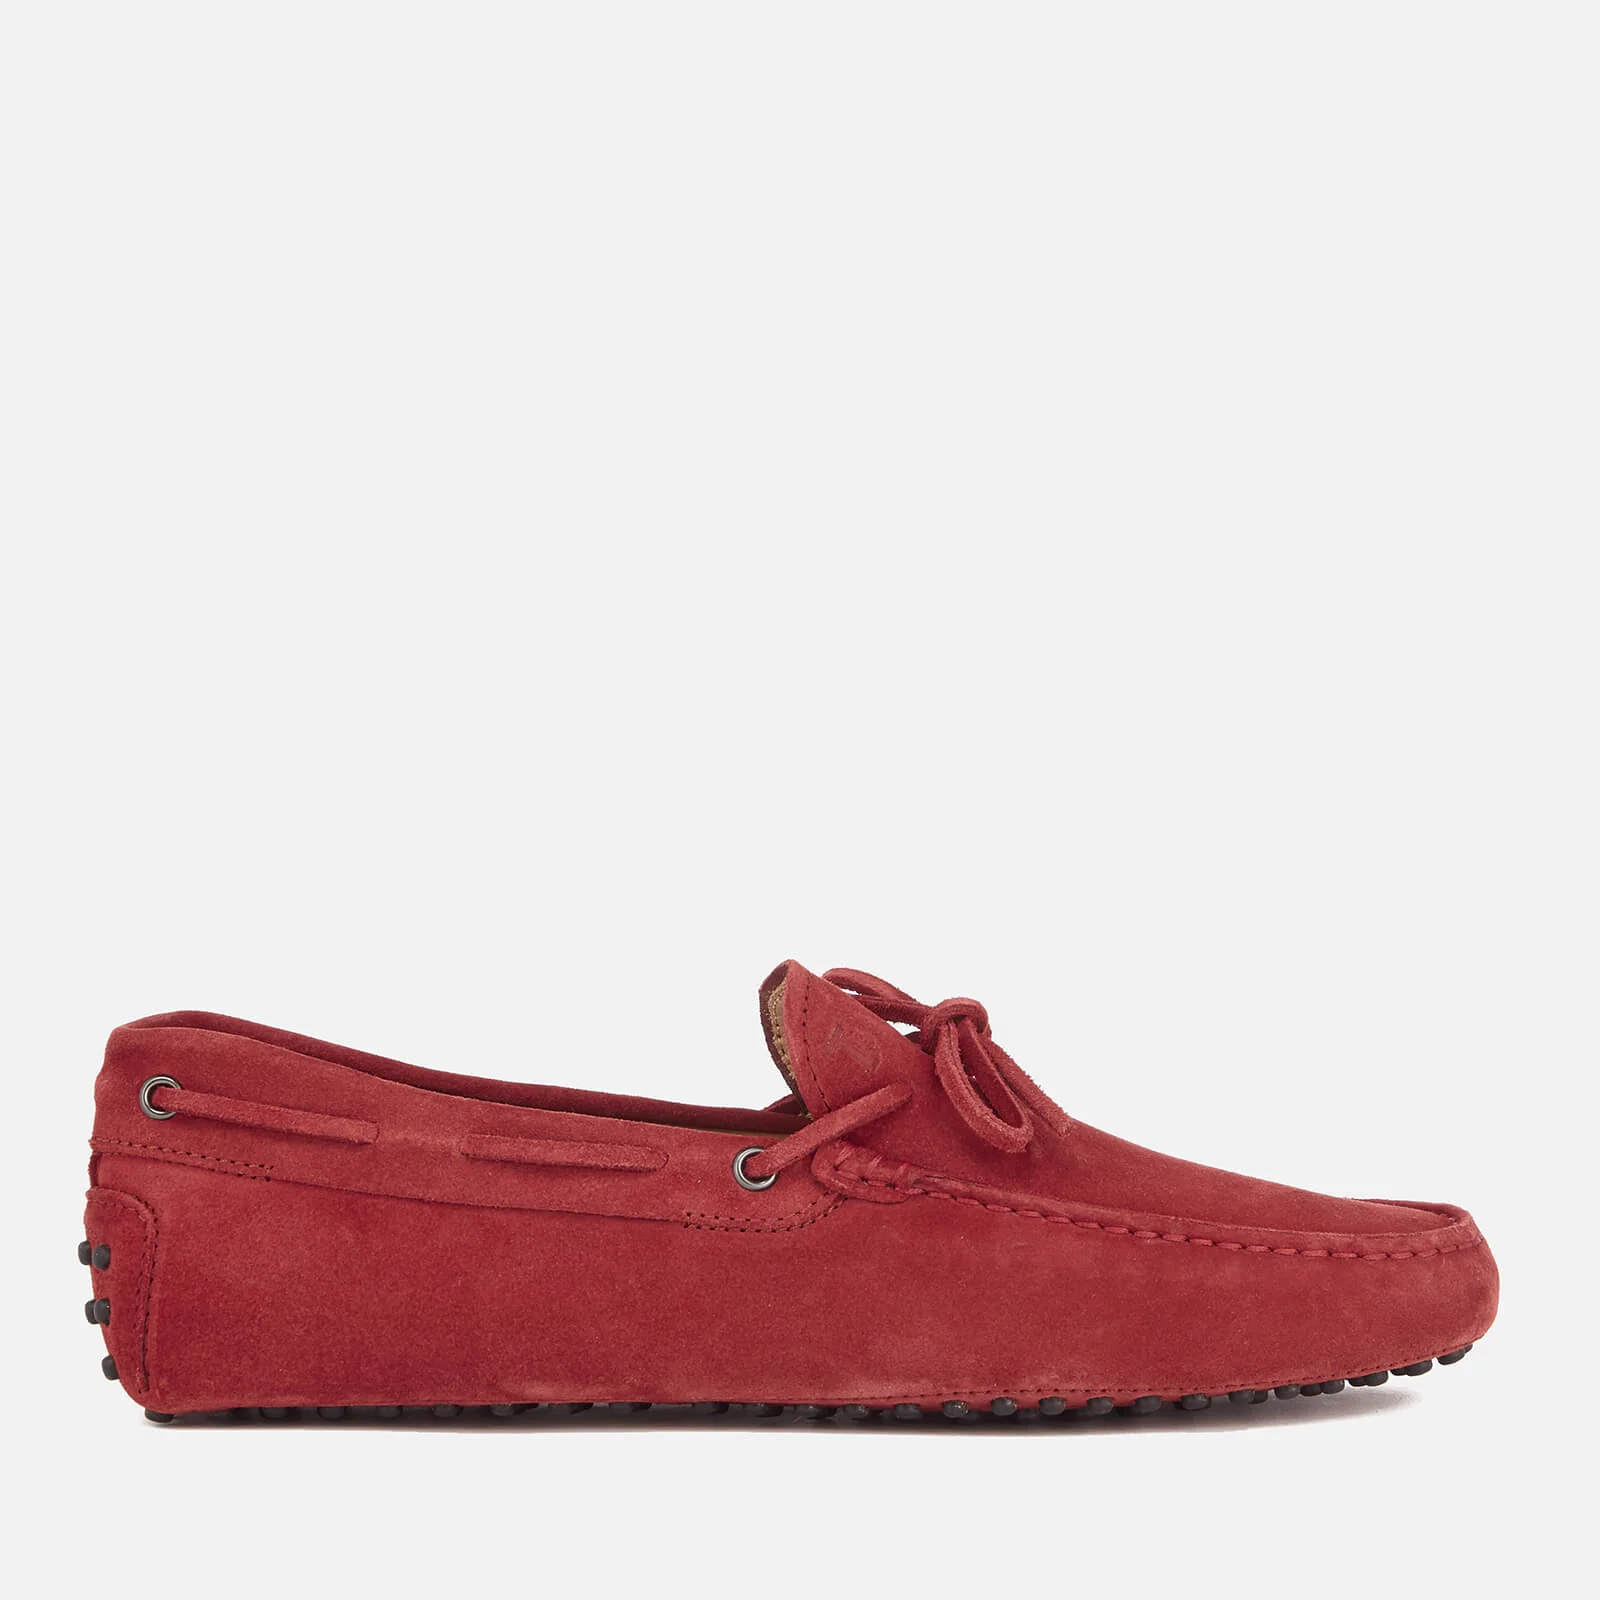 Tod's Men's Gommino Suede Driving Shoes - Red Image 1